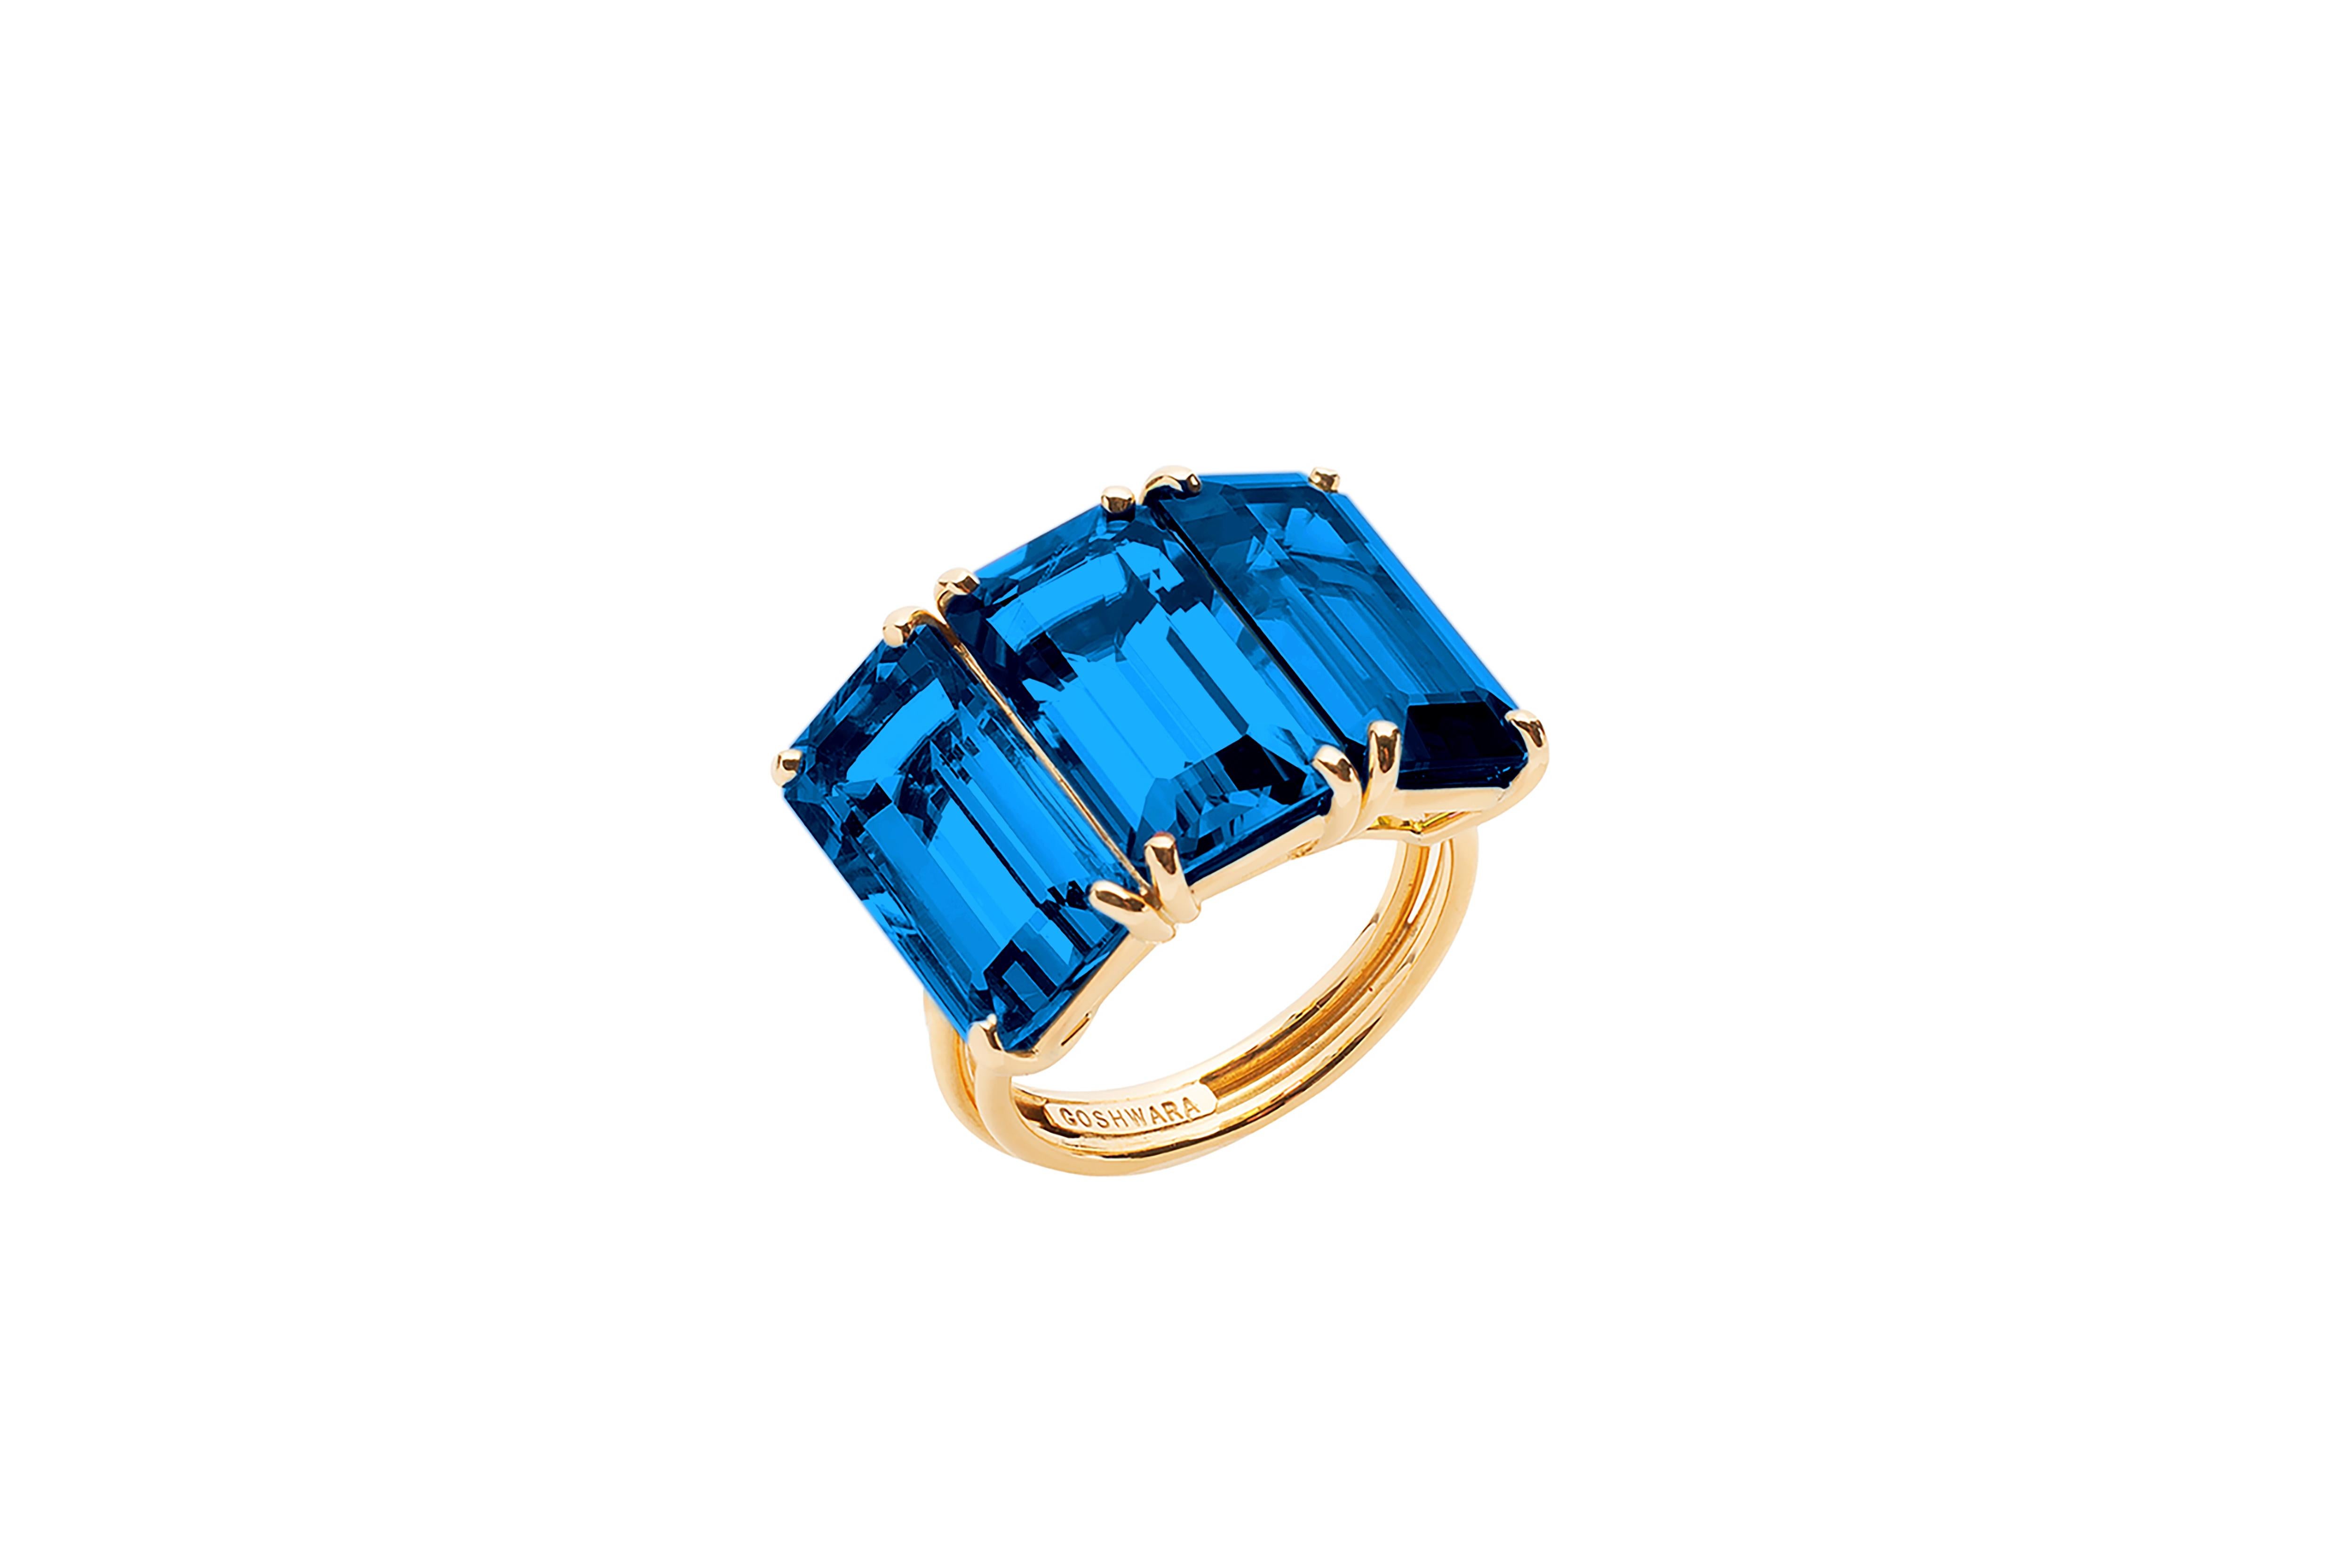 London Blue Topaz 3 Stone Emerald Cut Ring in 18K Yellow Gold from 'Gossip' Collection

Stone Size: 13 x 7 mm

Gemstone Approx. Wt: 14.07 Carats (London Blue Topaz)